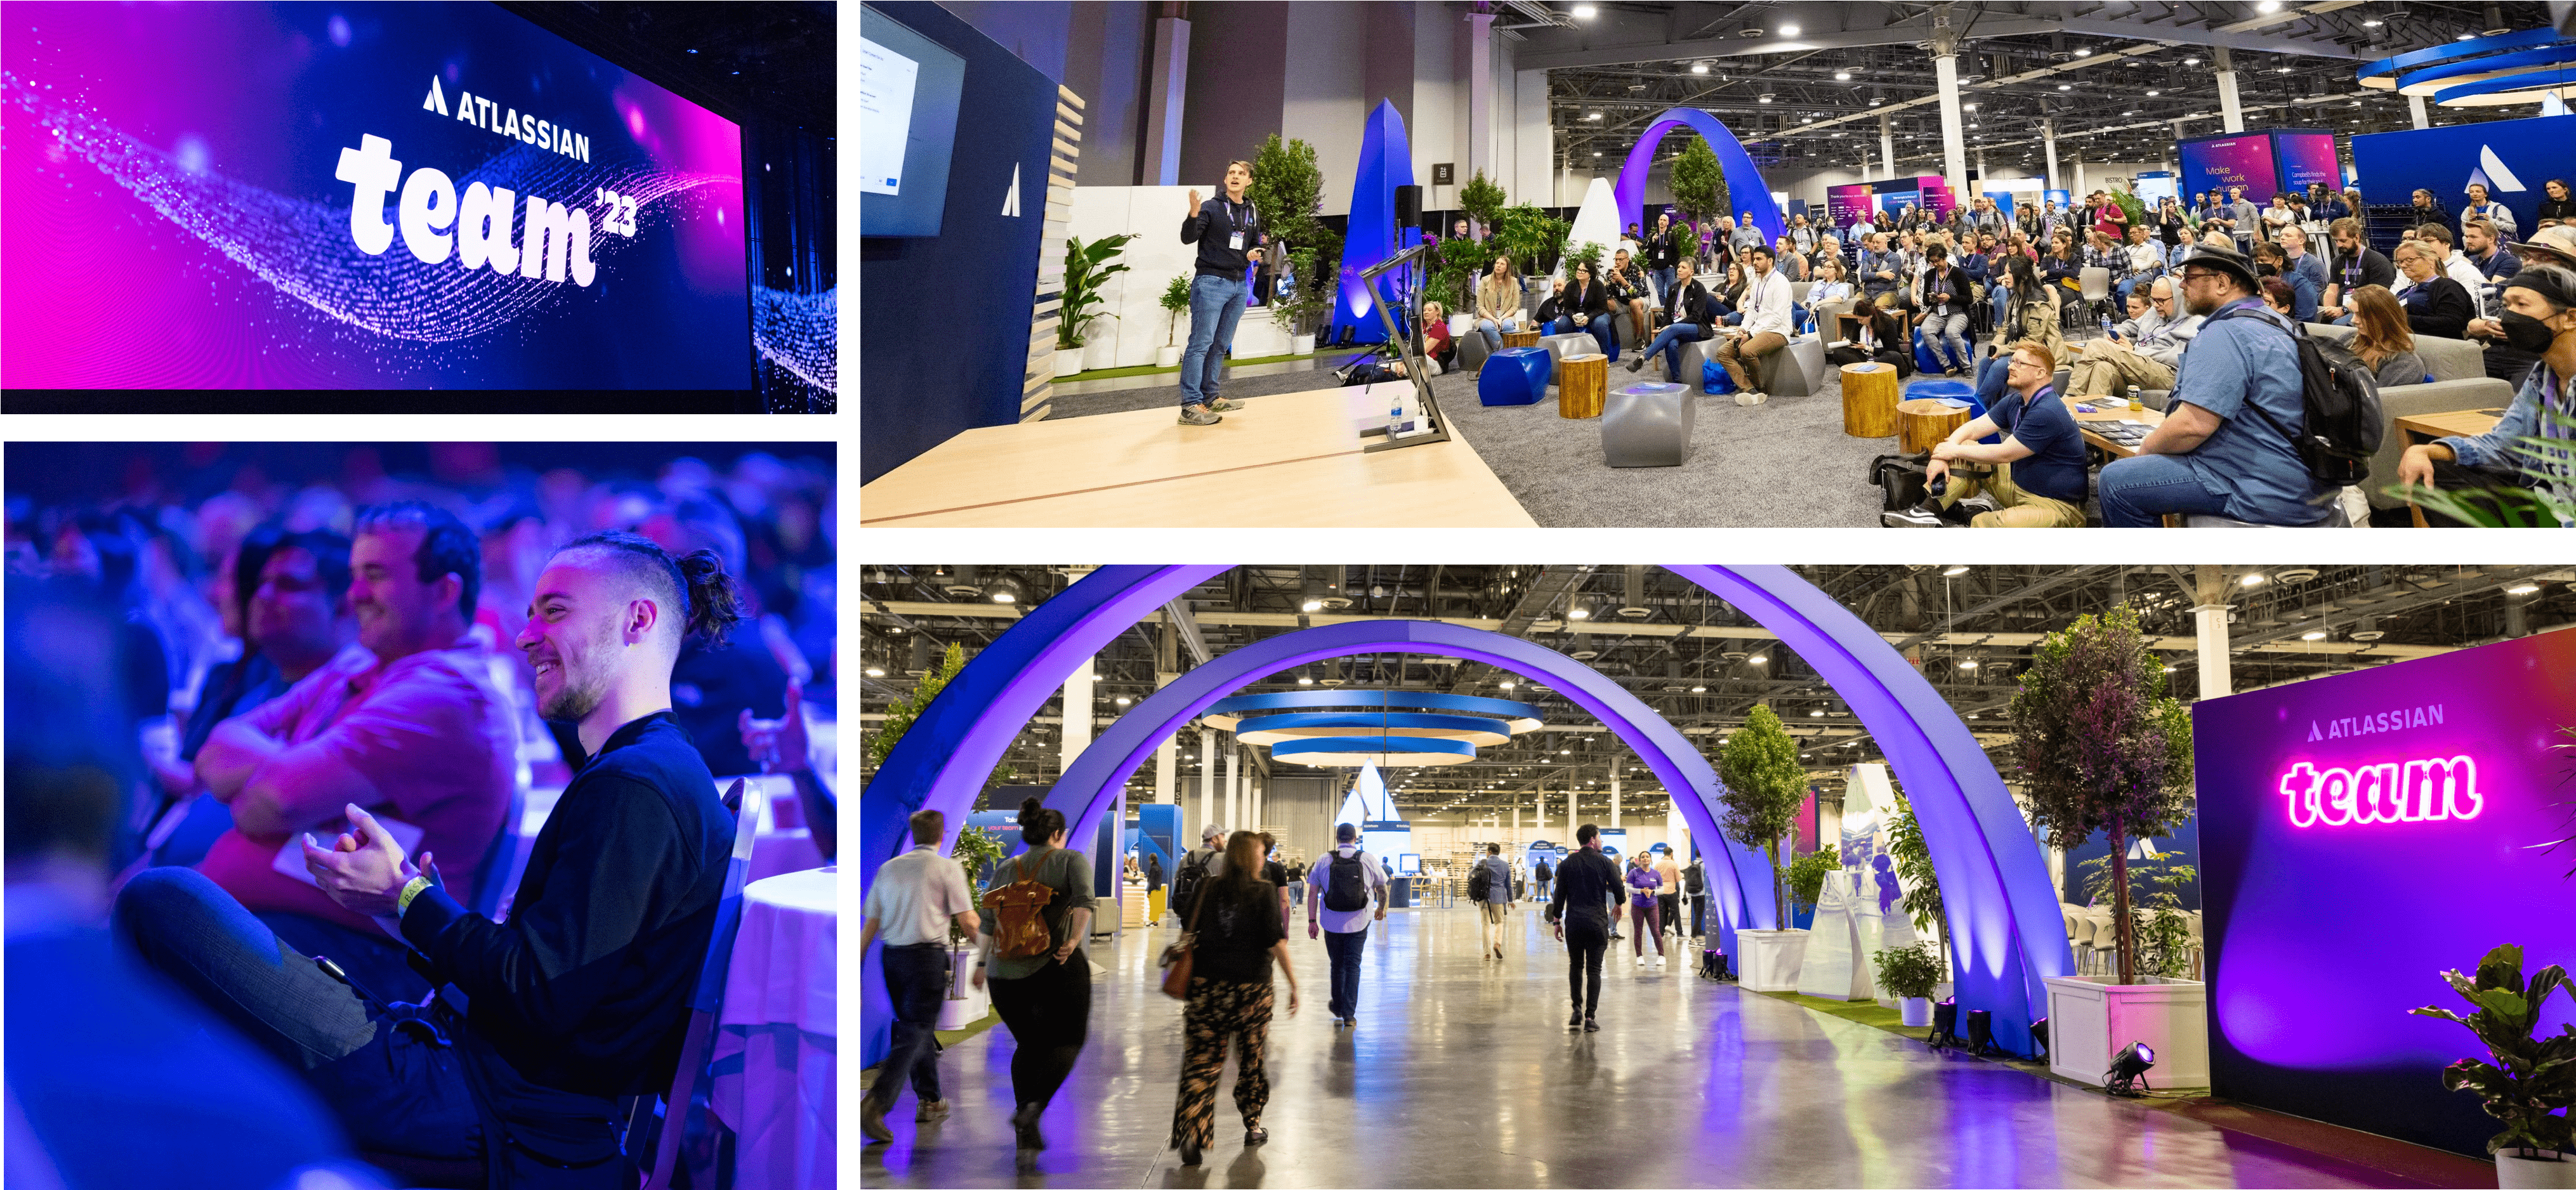 Collage of photos from Atlassian's Team '23 conference in Las Vegas